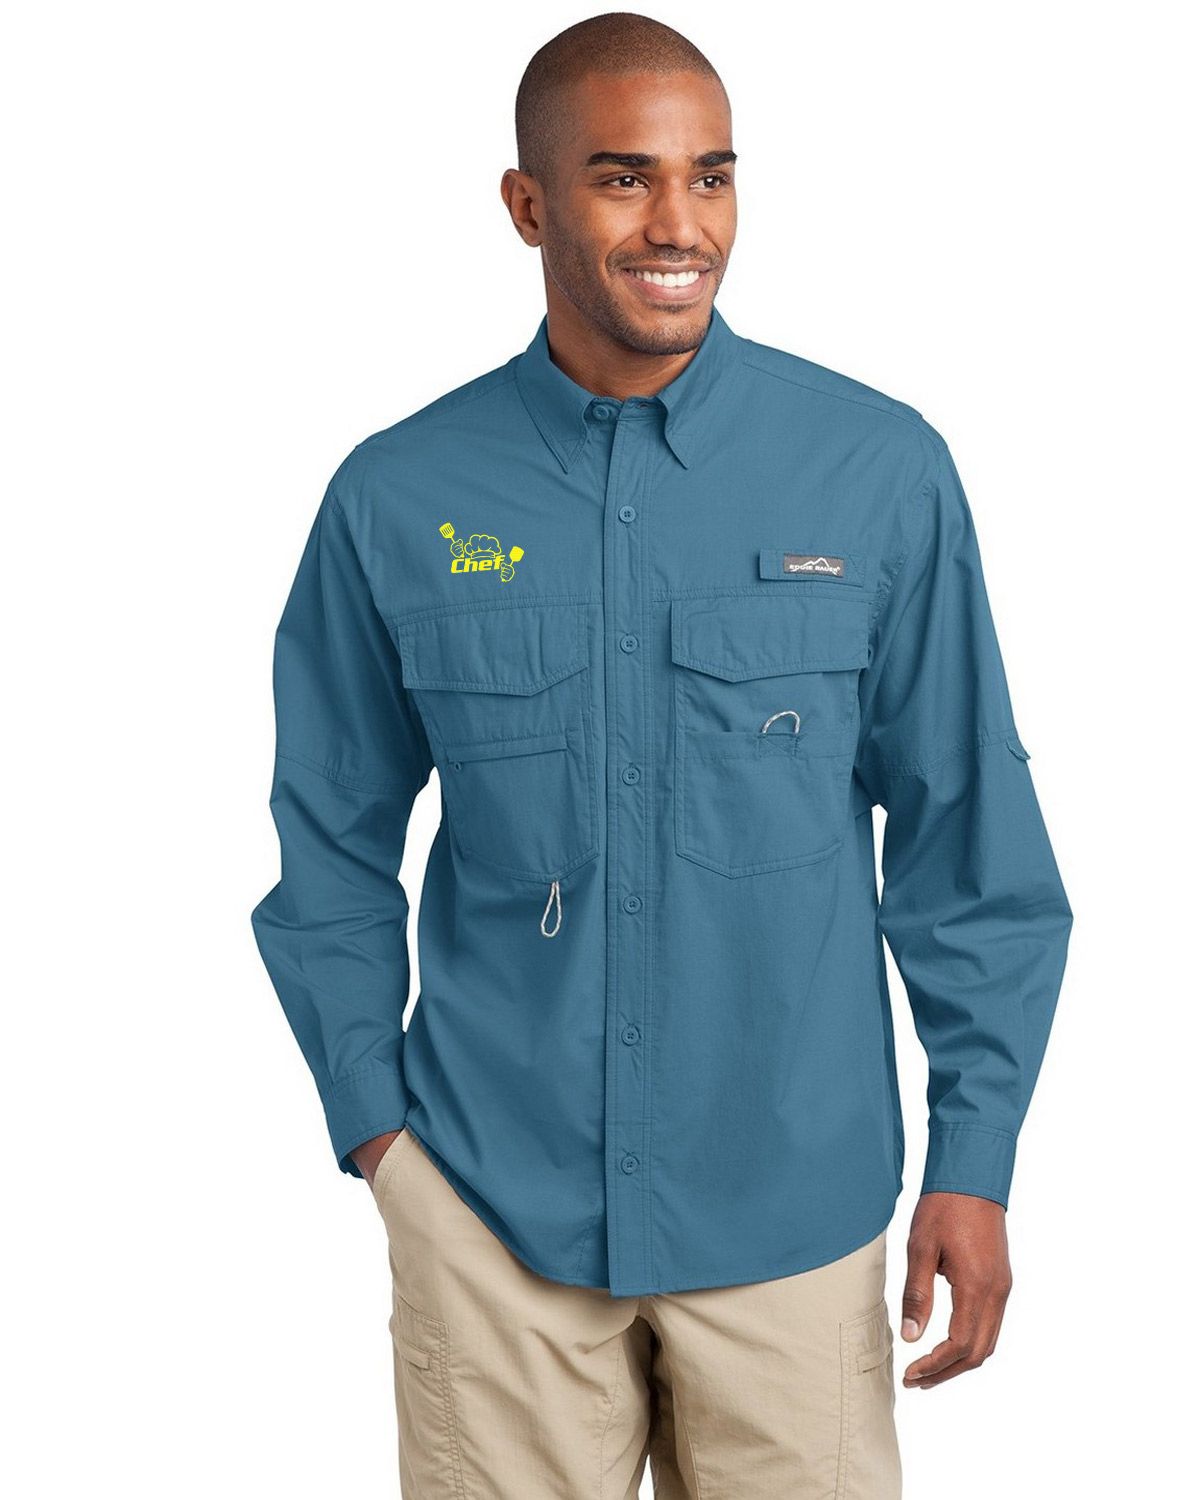 Eddie Bauer Logo Embroidered Long Sleeve Fishing Shirt at ApparelnBags.com